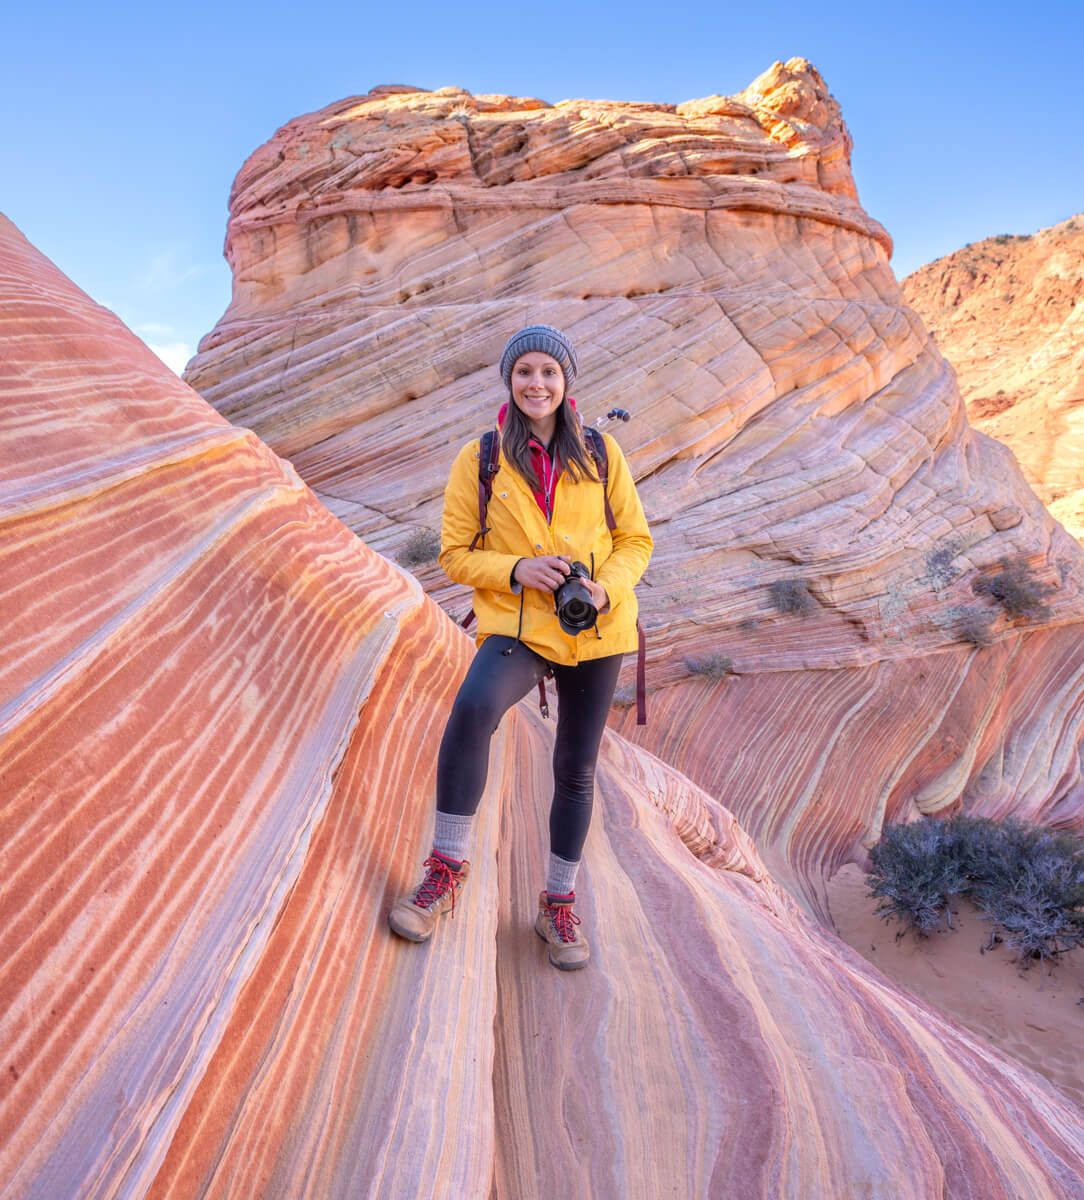 Hiker holding camera in a yellow coat and wooly hat standing on a sloped colorful rock formation with a clear blue sky